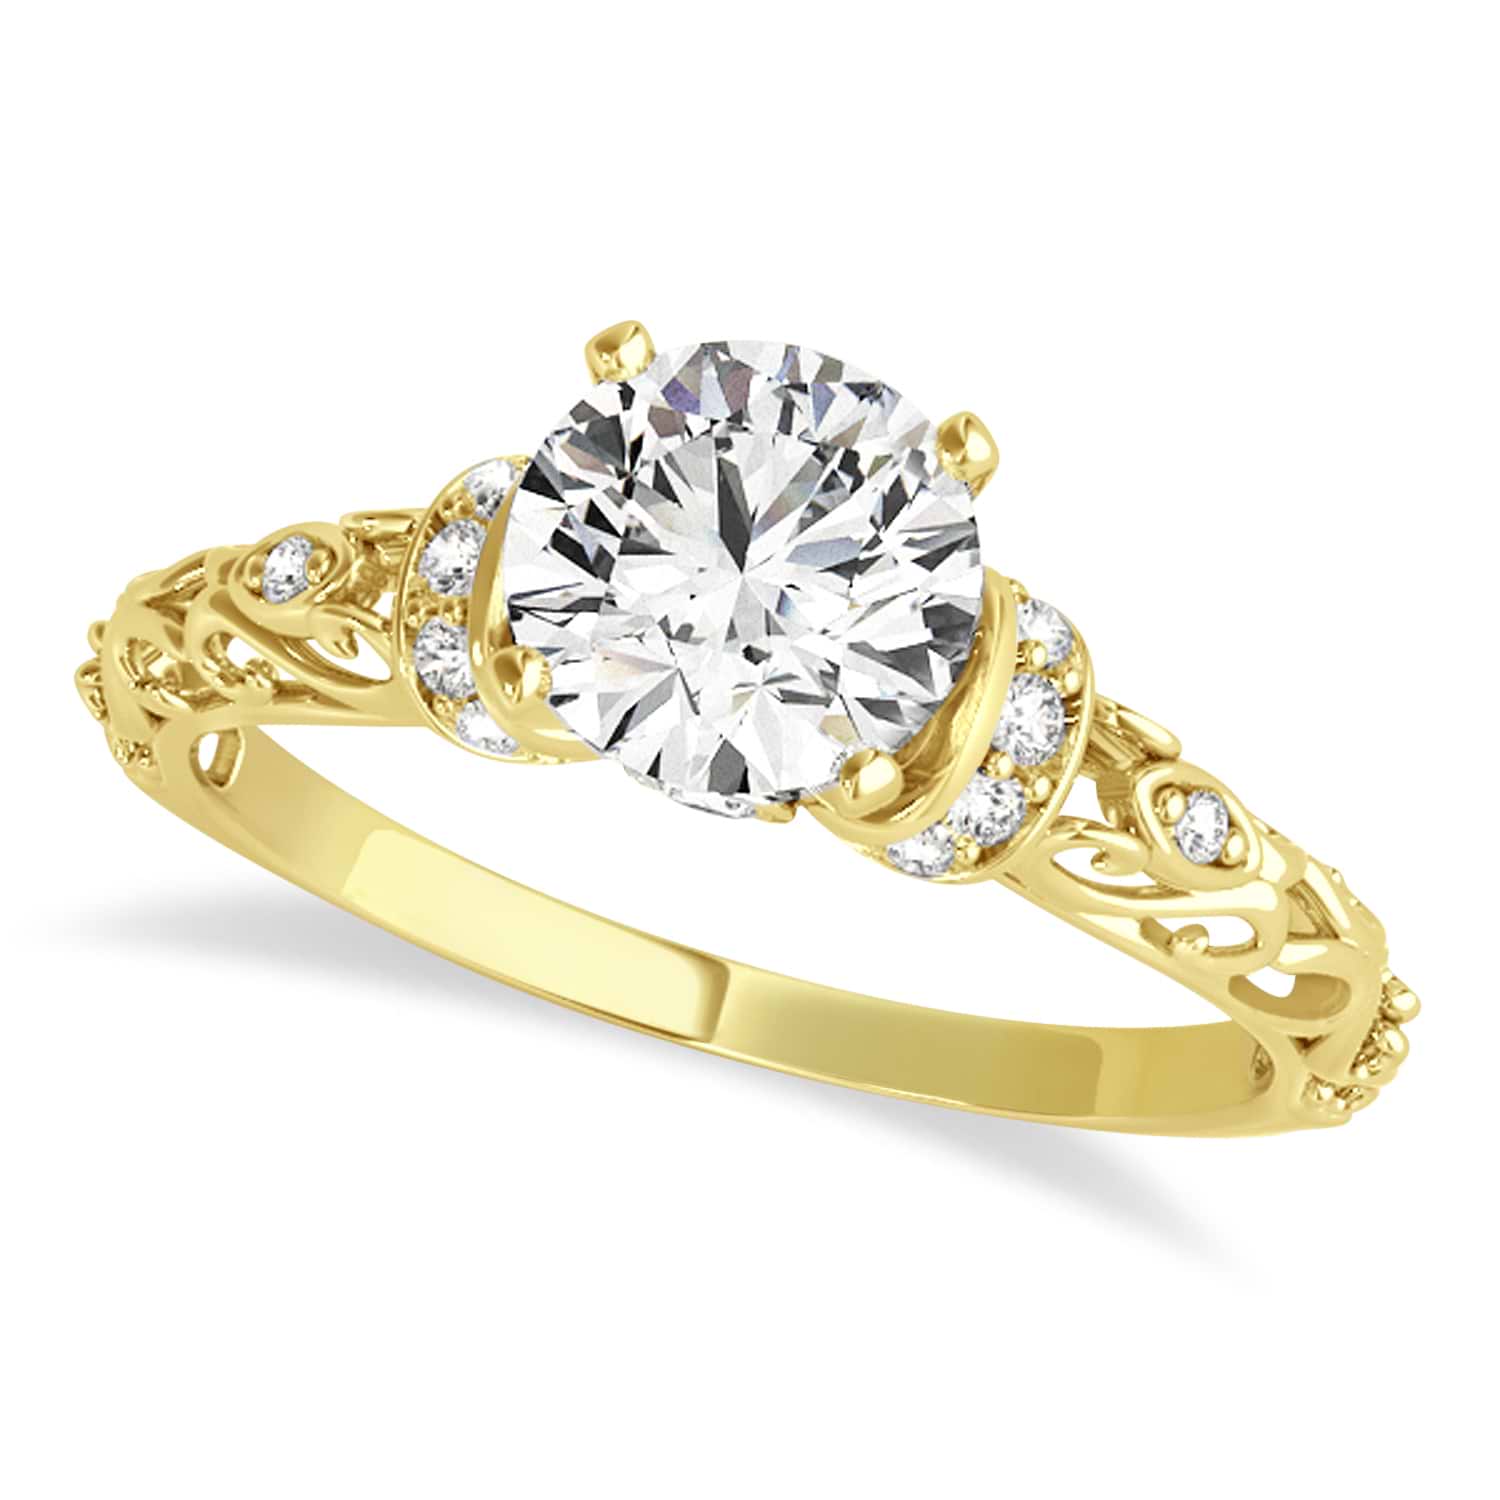 Diamond Antique Style Engagement Ring 14k Yellow Gold (1.62ct)